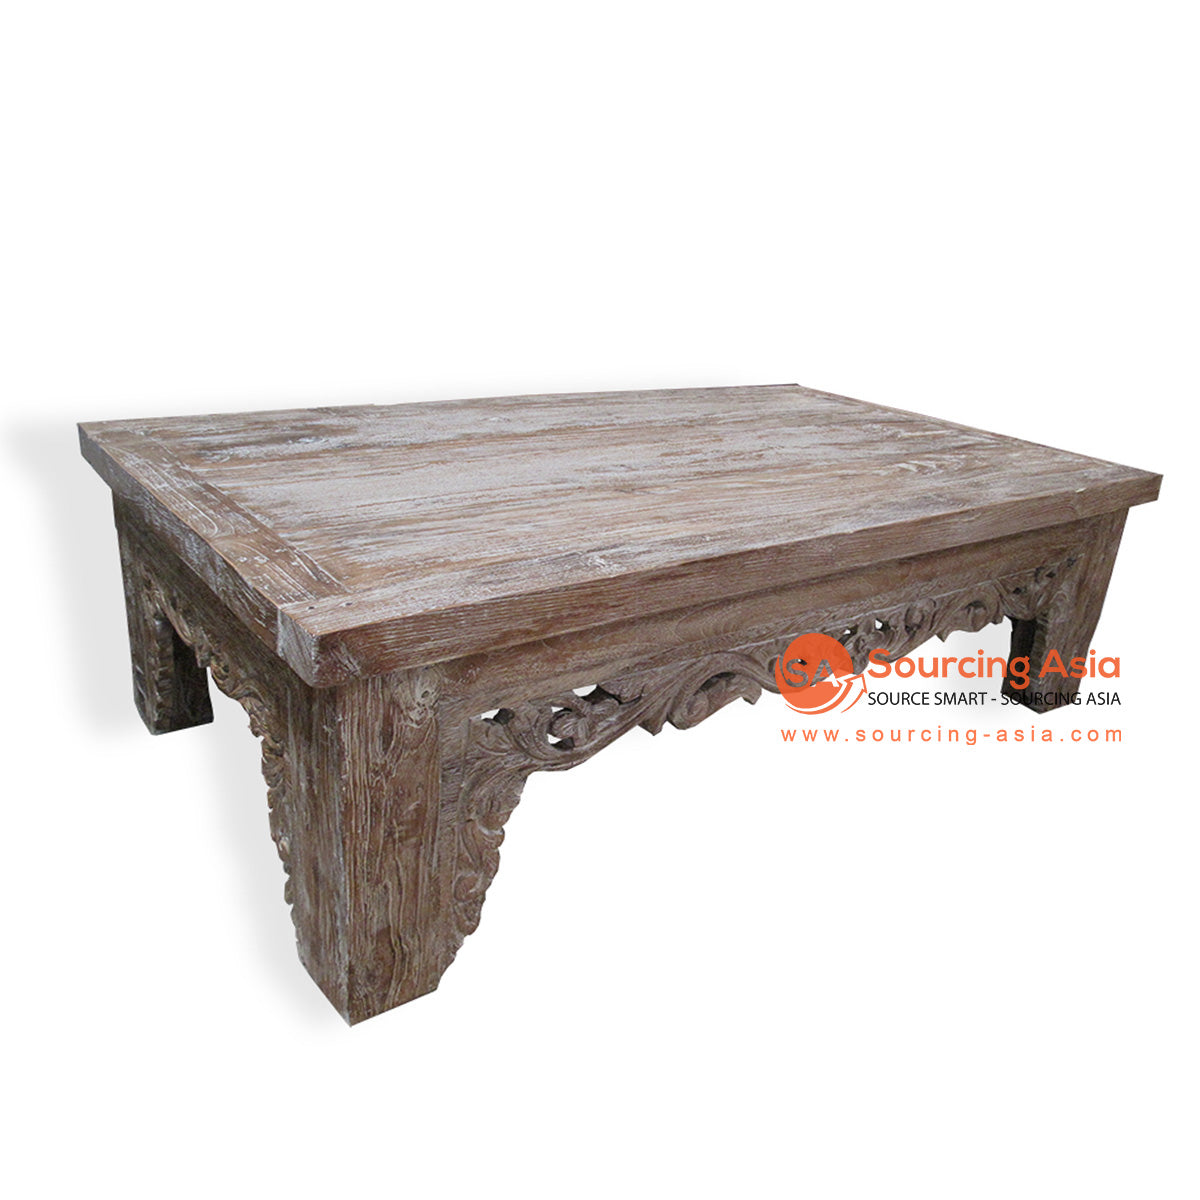 LAC049 WHITE WASH TEAK WOOD CARVED COFFEE TABLE